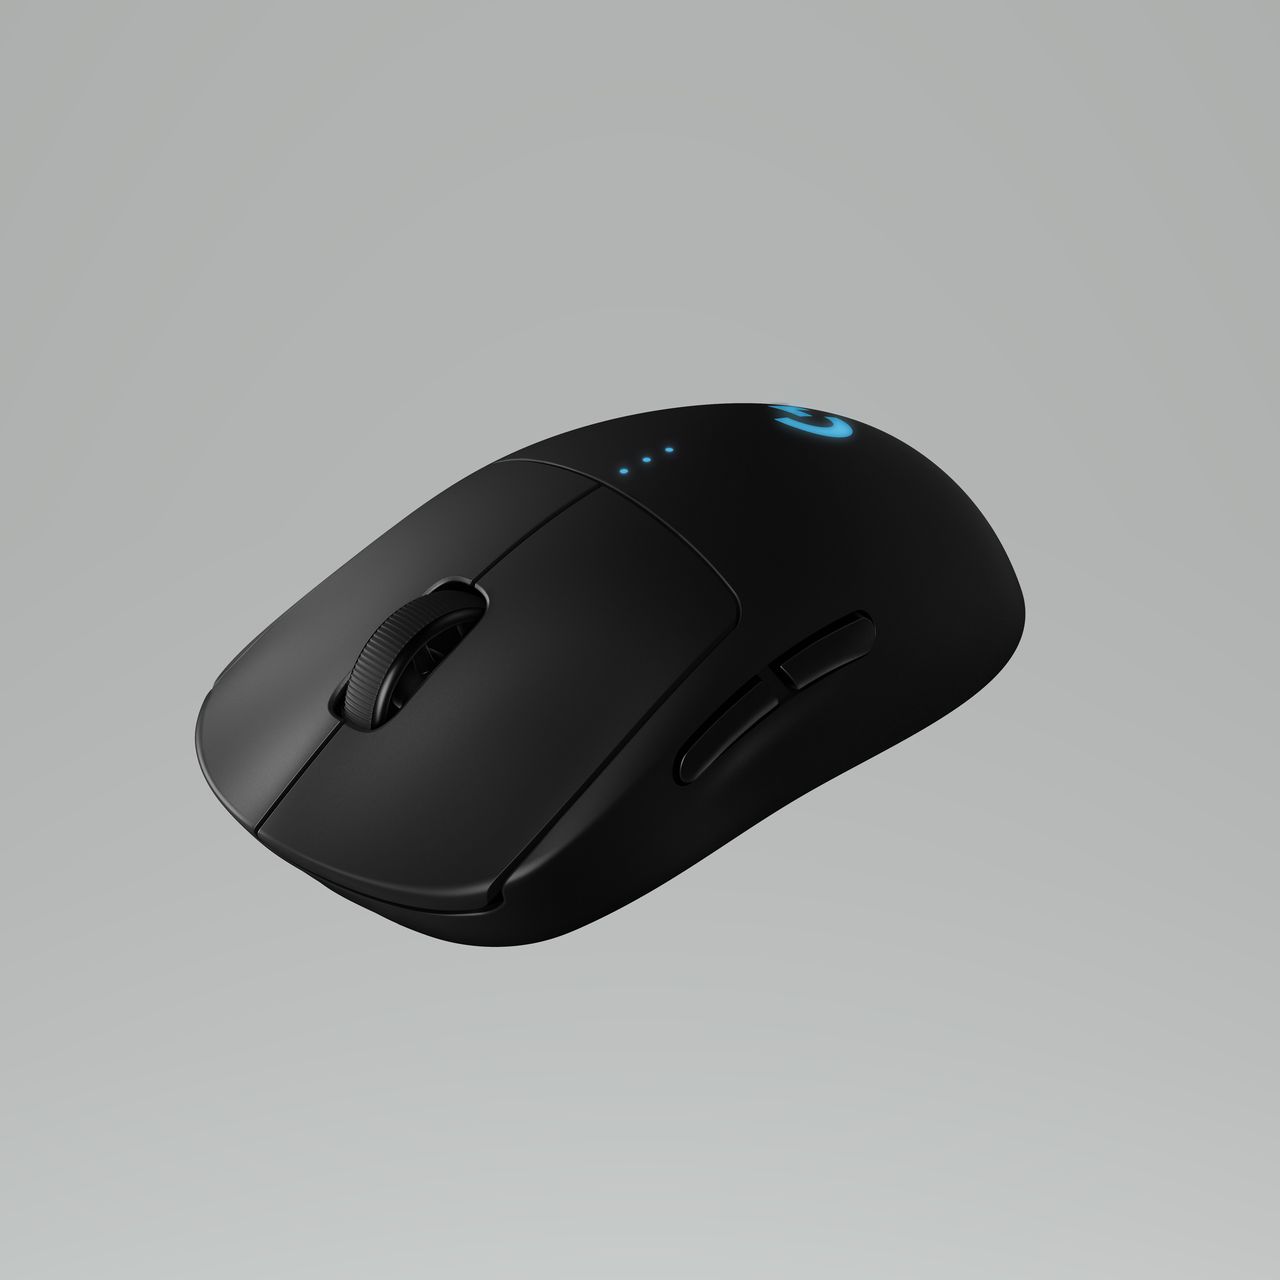 Logitech G Mouse Gaming PRO Wirelesse